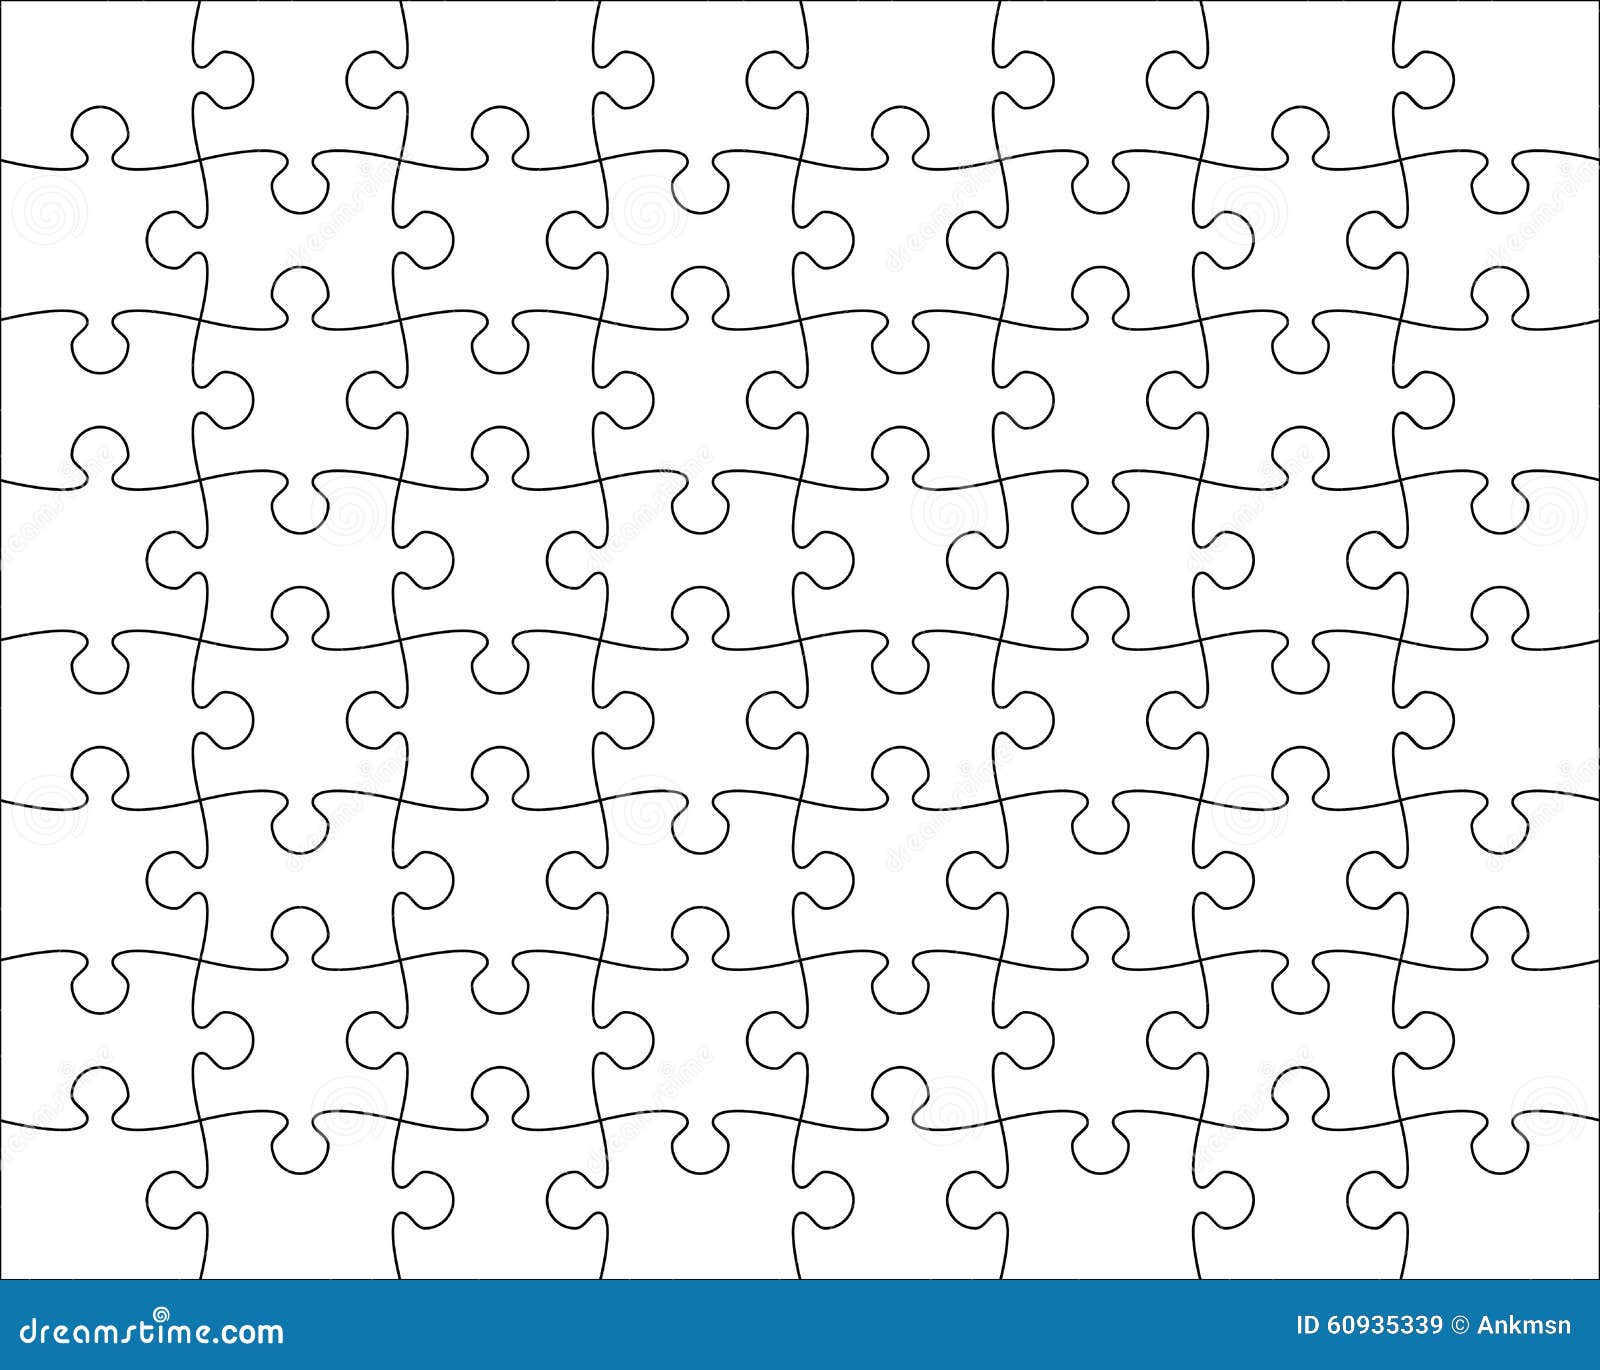 textbook Rubber Sobriquette Jigsaw Puzzle Template Editable Blend Stock Vector - Illustration of group,  construction: 60935339